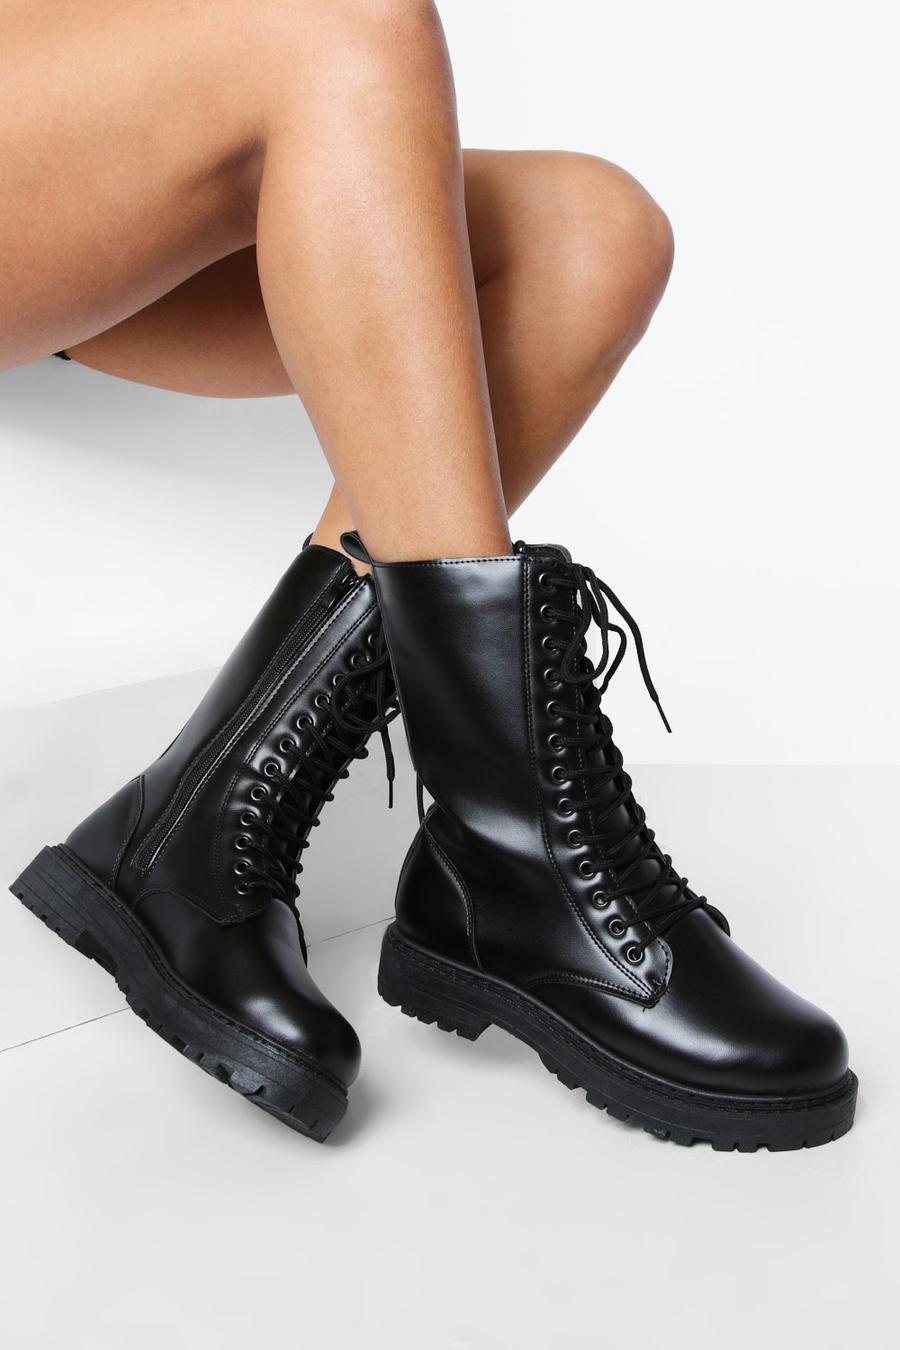 Black Wide Width Calf Height Combat Boots image number 1